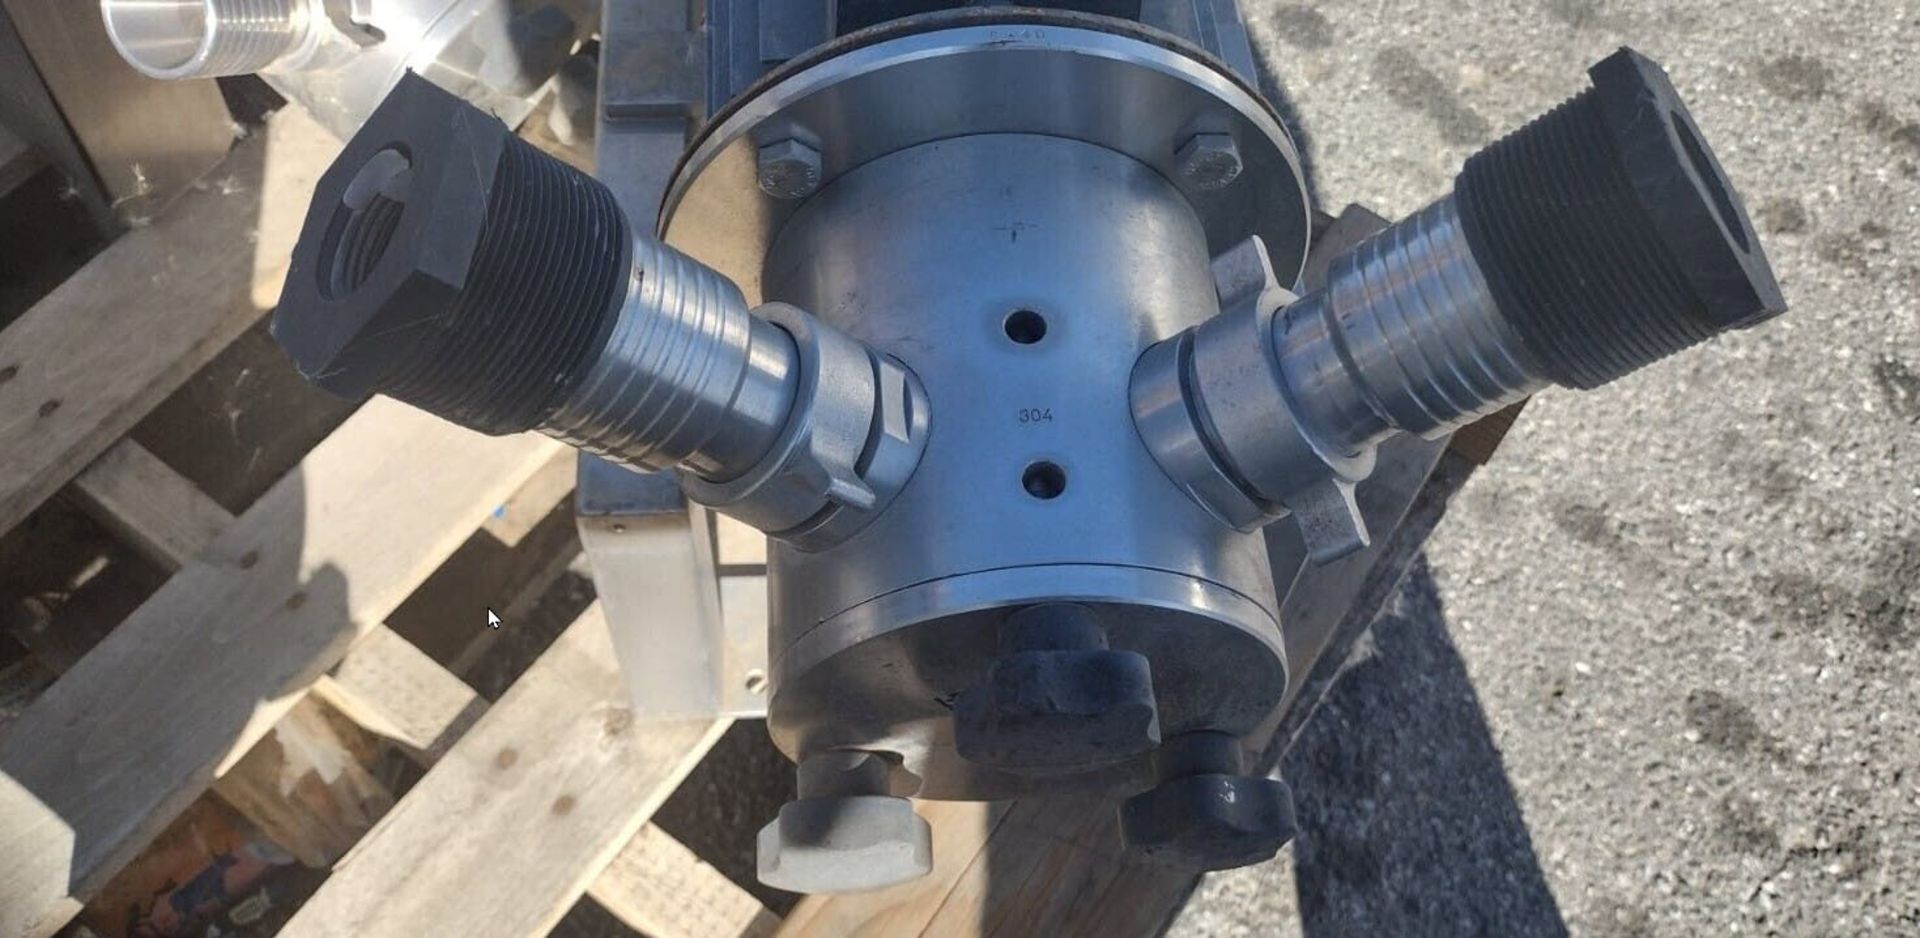 (Located in Hollister, CA) Siemens Coating System Coating Pump, Rigging Fee: $100